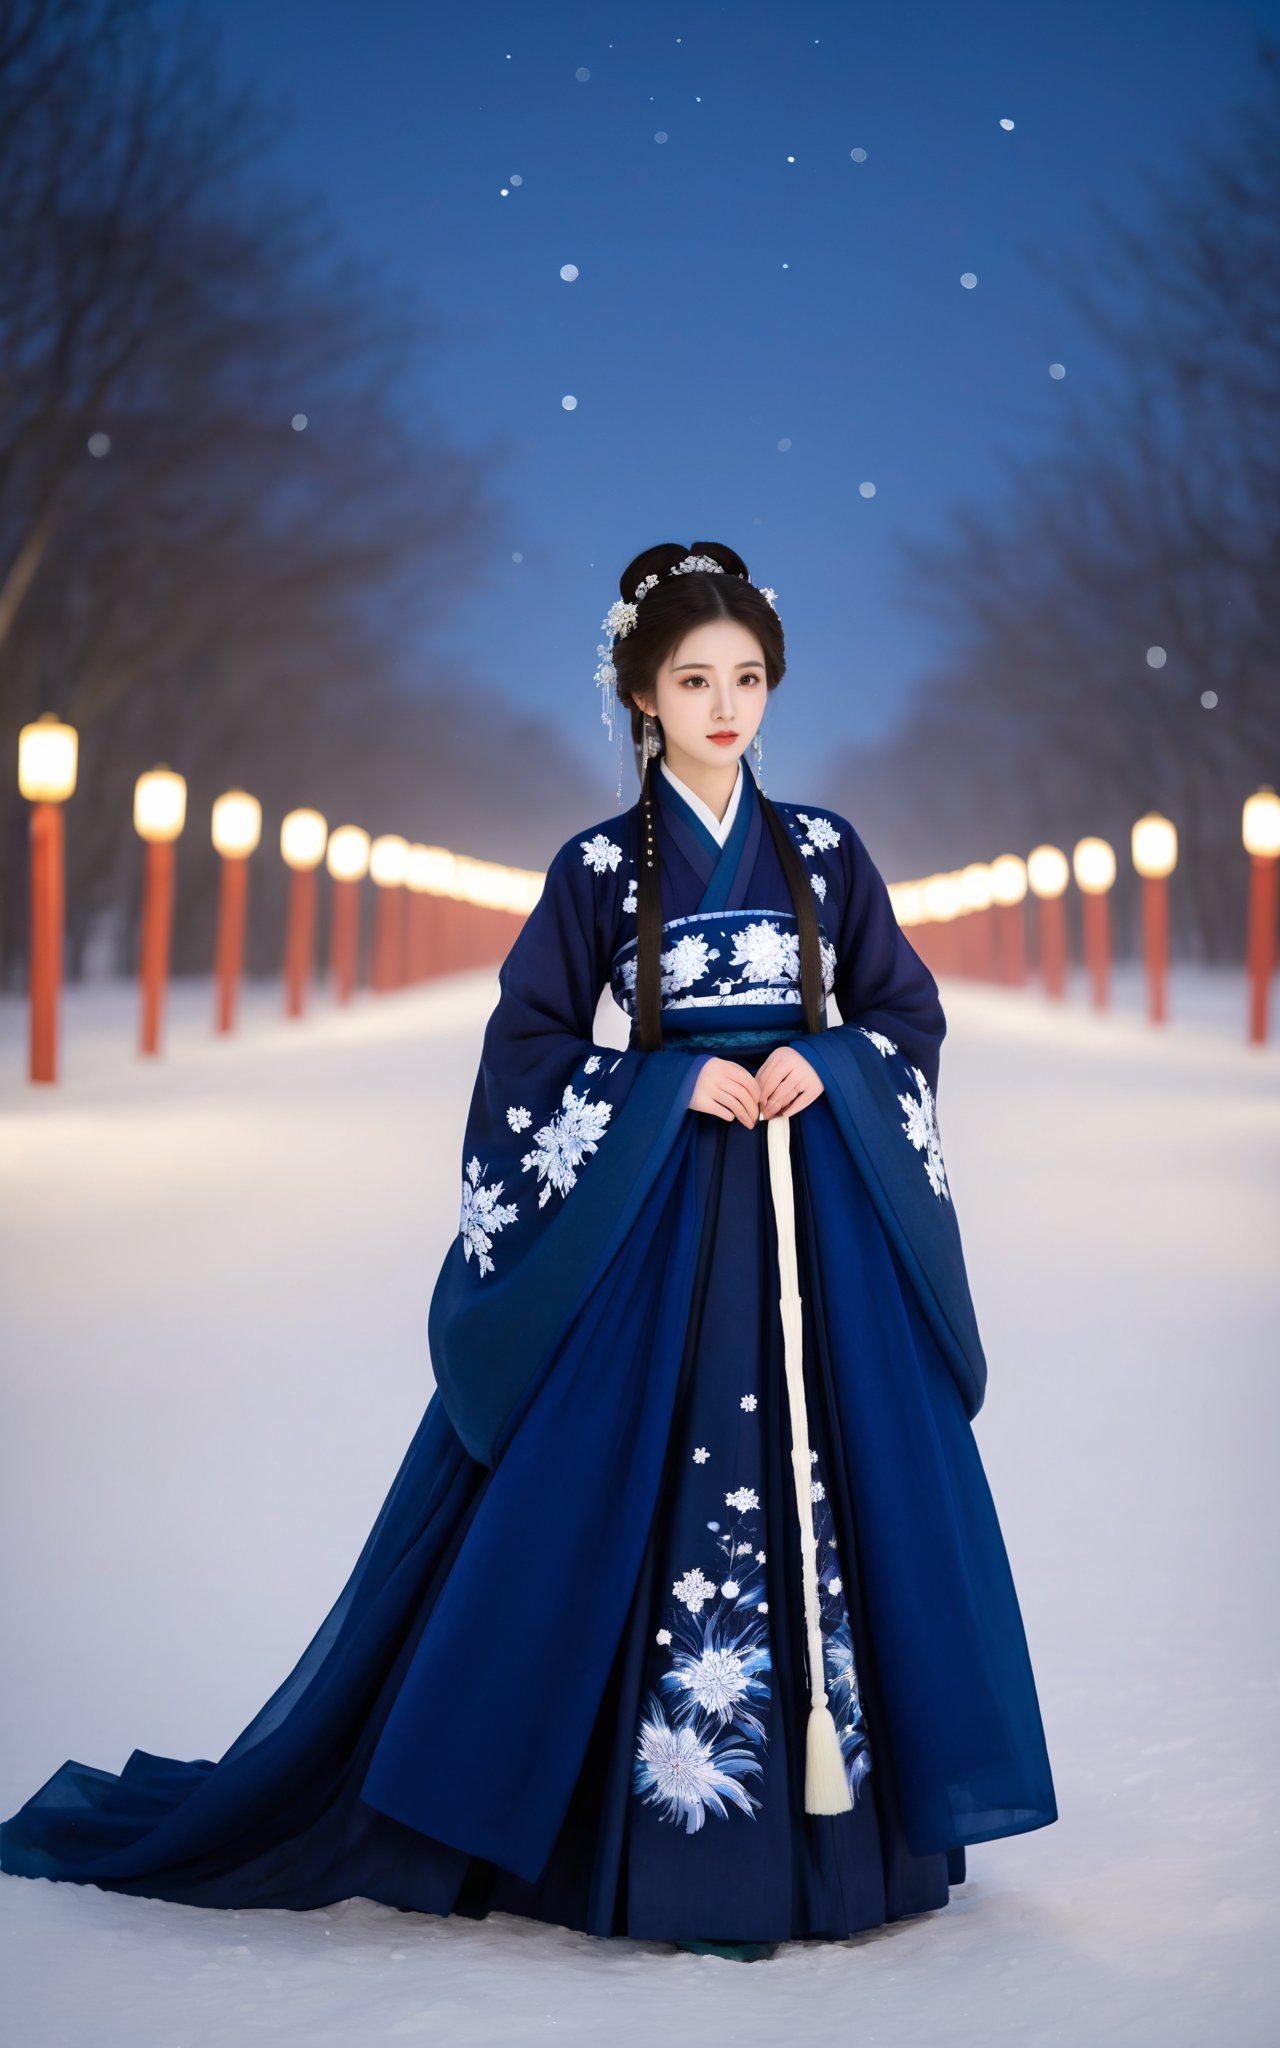 On a snowy night,a woman in a Hanfu of deep indigo stands out against the white landscape. The Hanfu,with its intricate snowflake patterns,seems to embrace the winter's chill. The soft glow of lanterns illuminates her path,creating a cozy scene of winter warmth.,